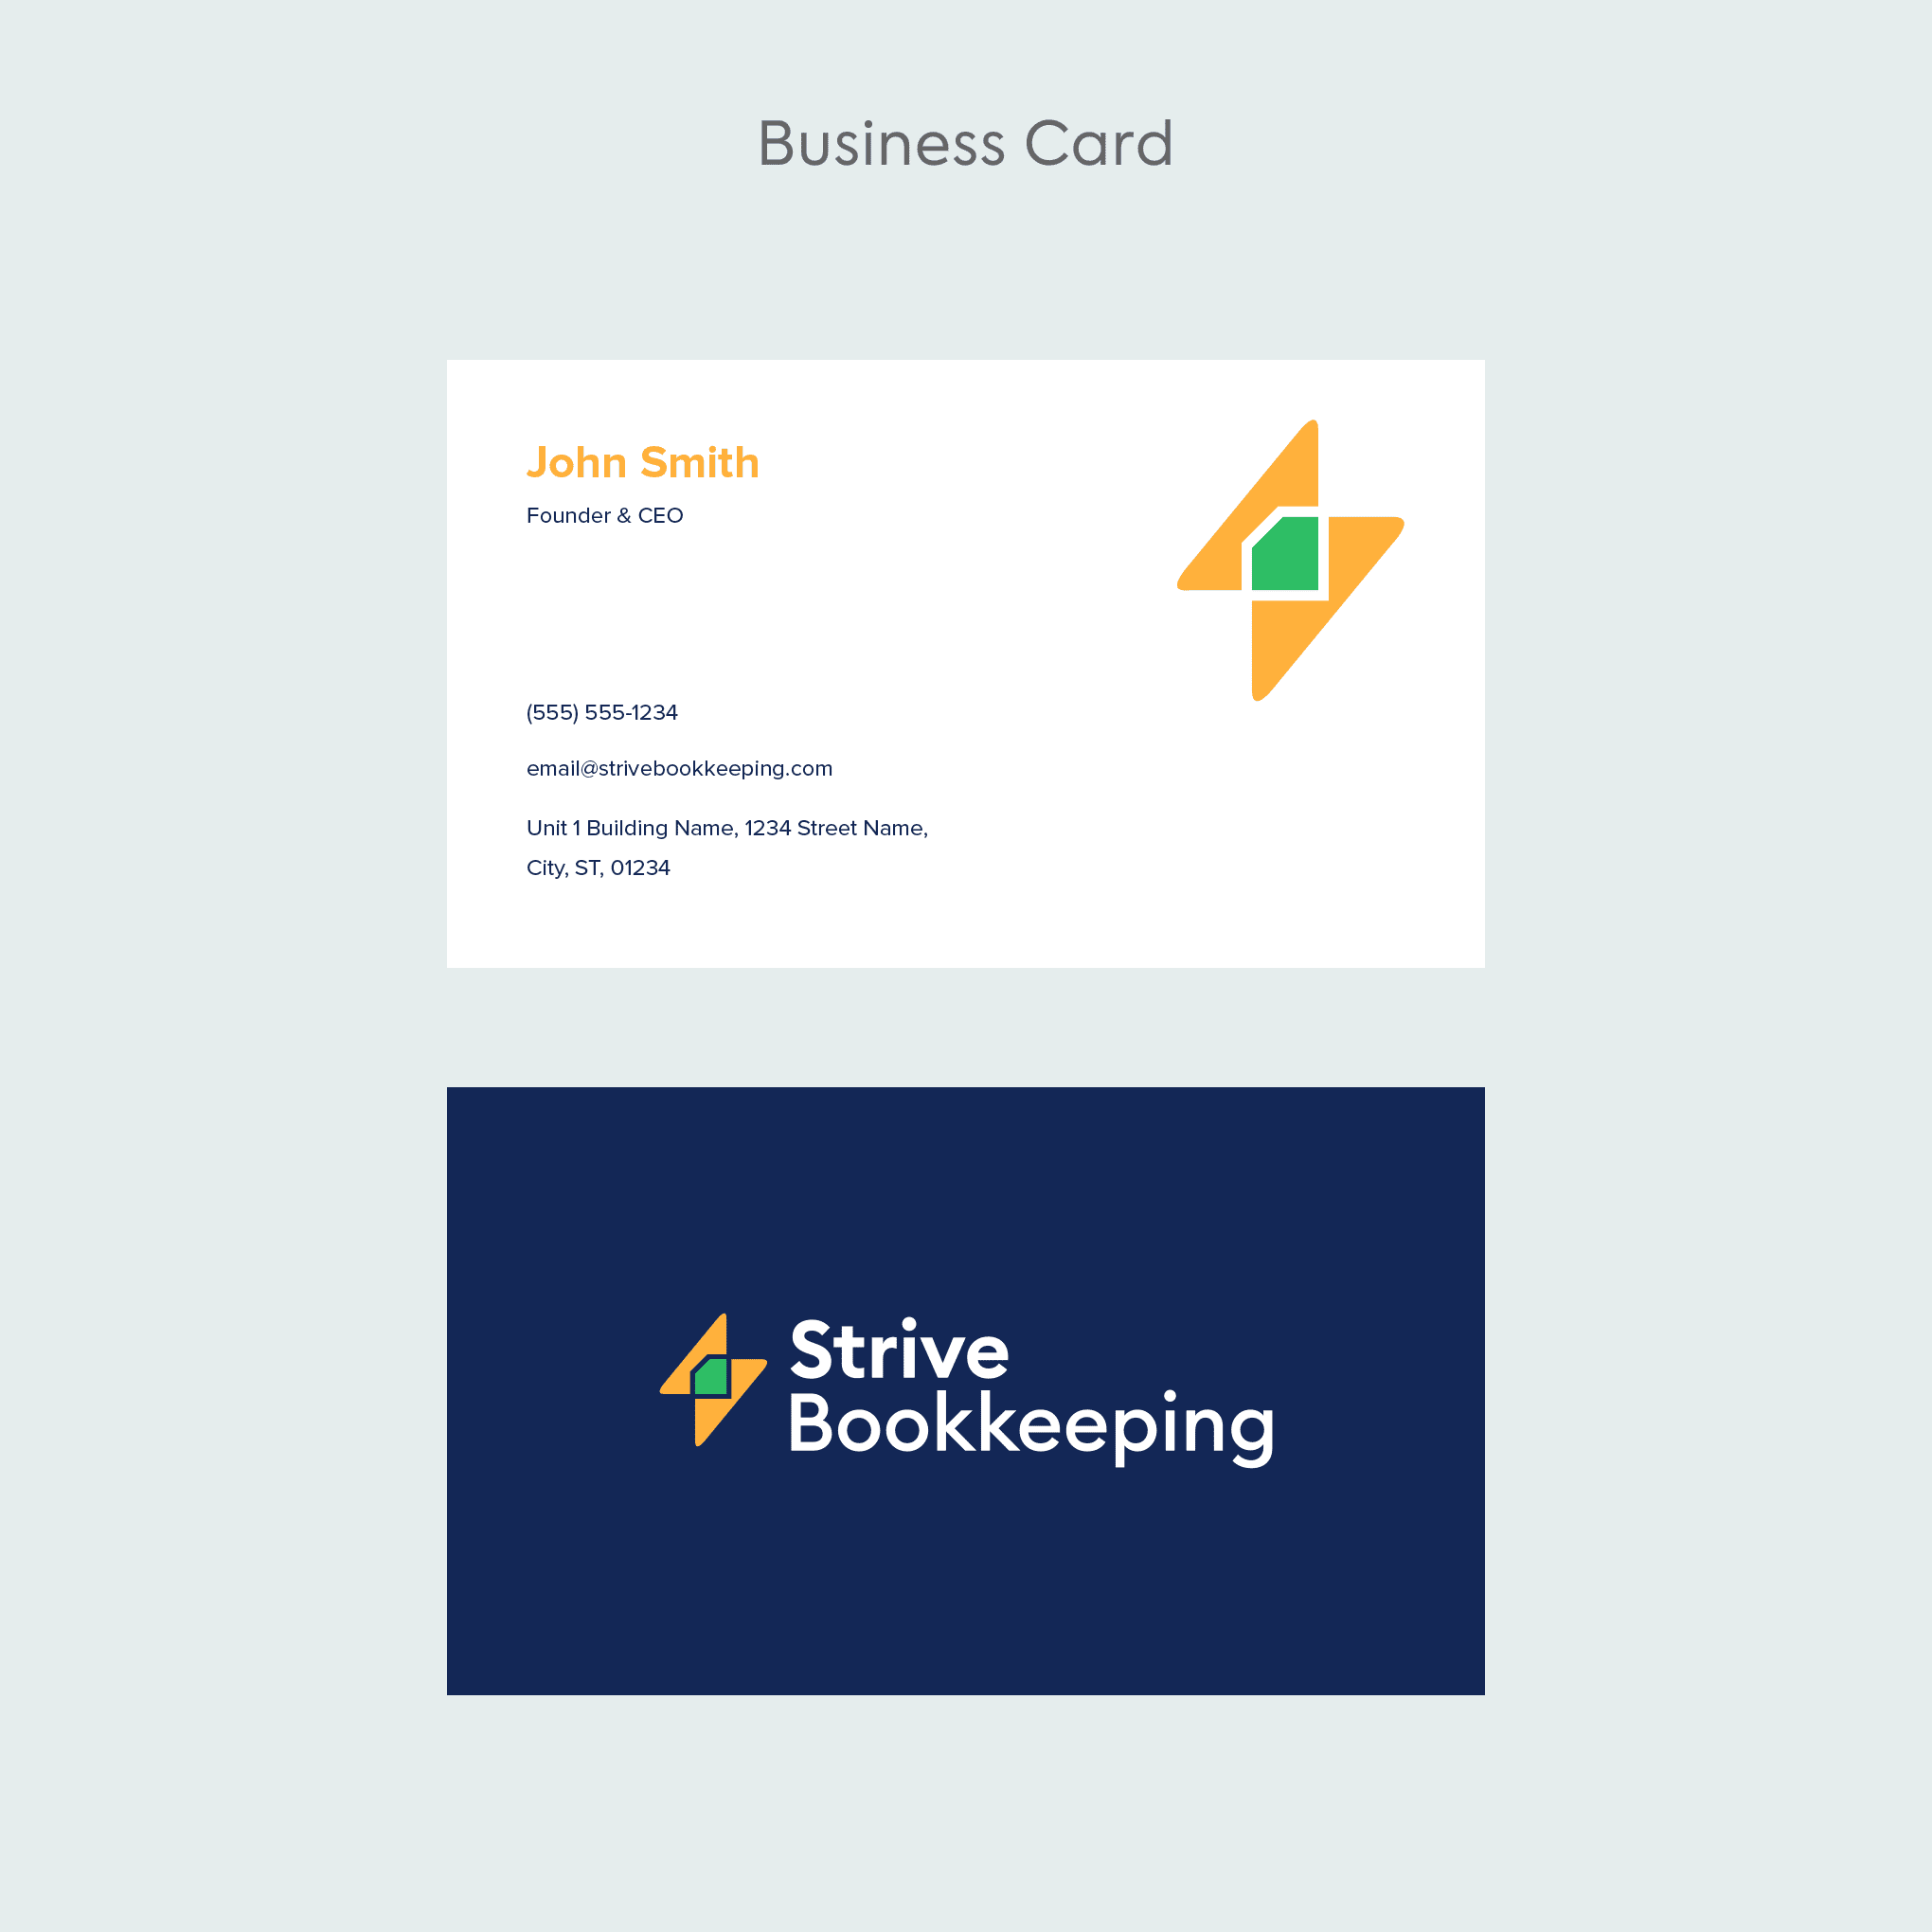 04 - Business Card Template (12)